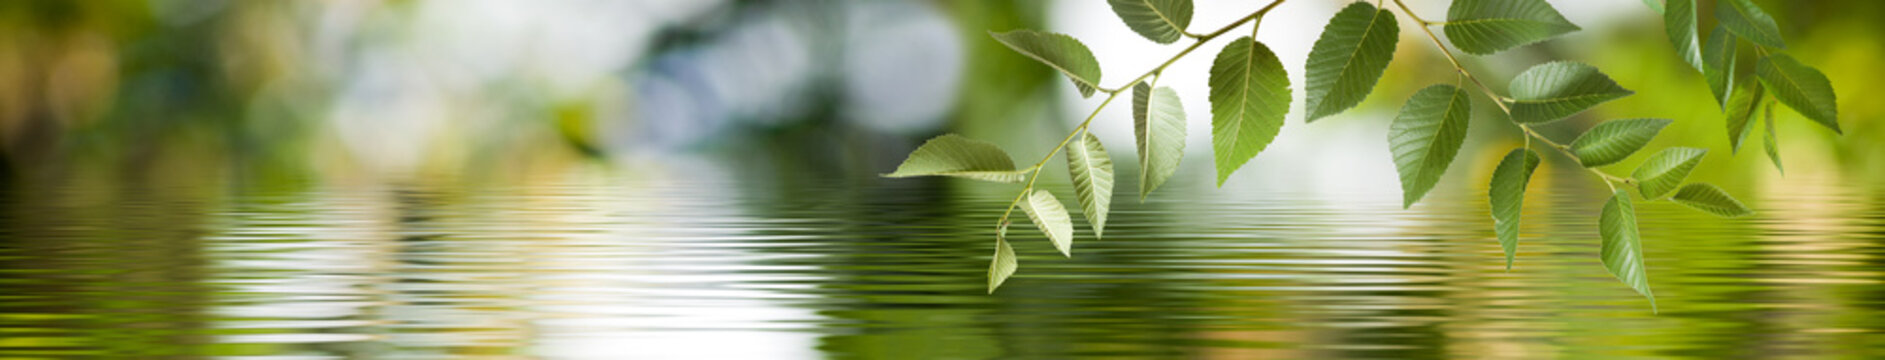 Image of a branch with leaves above the surface of the water. Wide format.